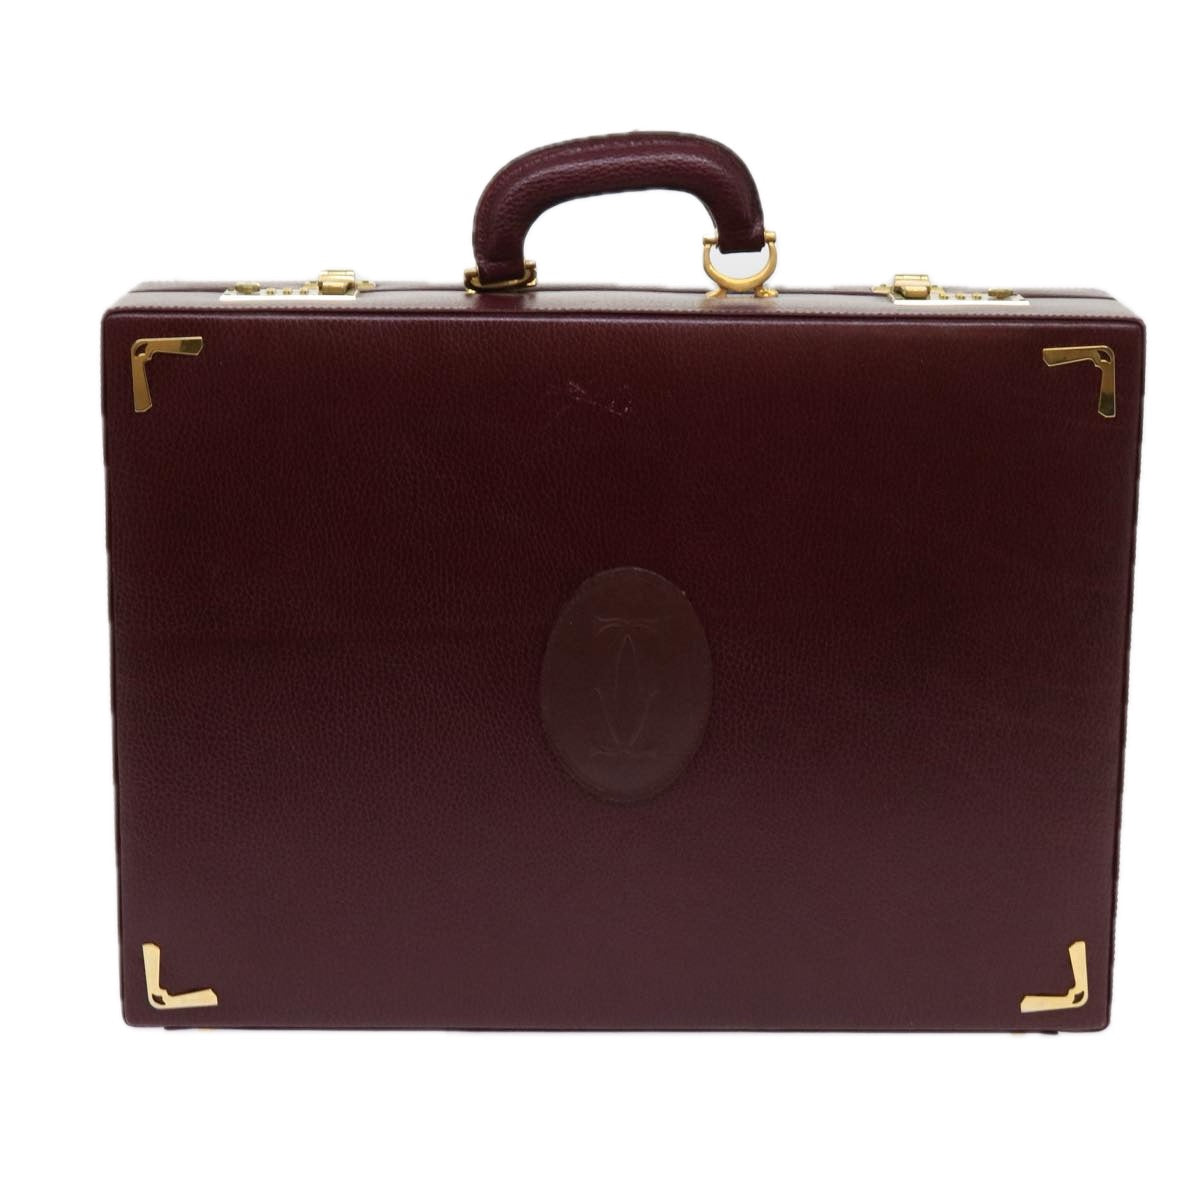 CARTIER Attache Case Trunk Leather Wine Red Auth ar11249 - 0